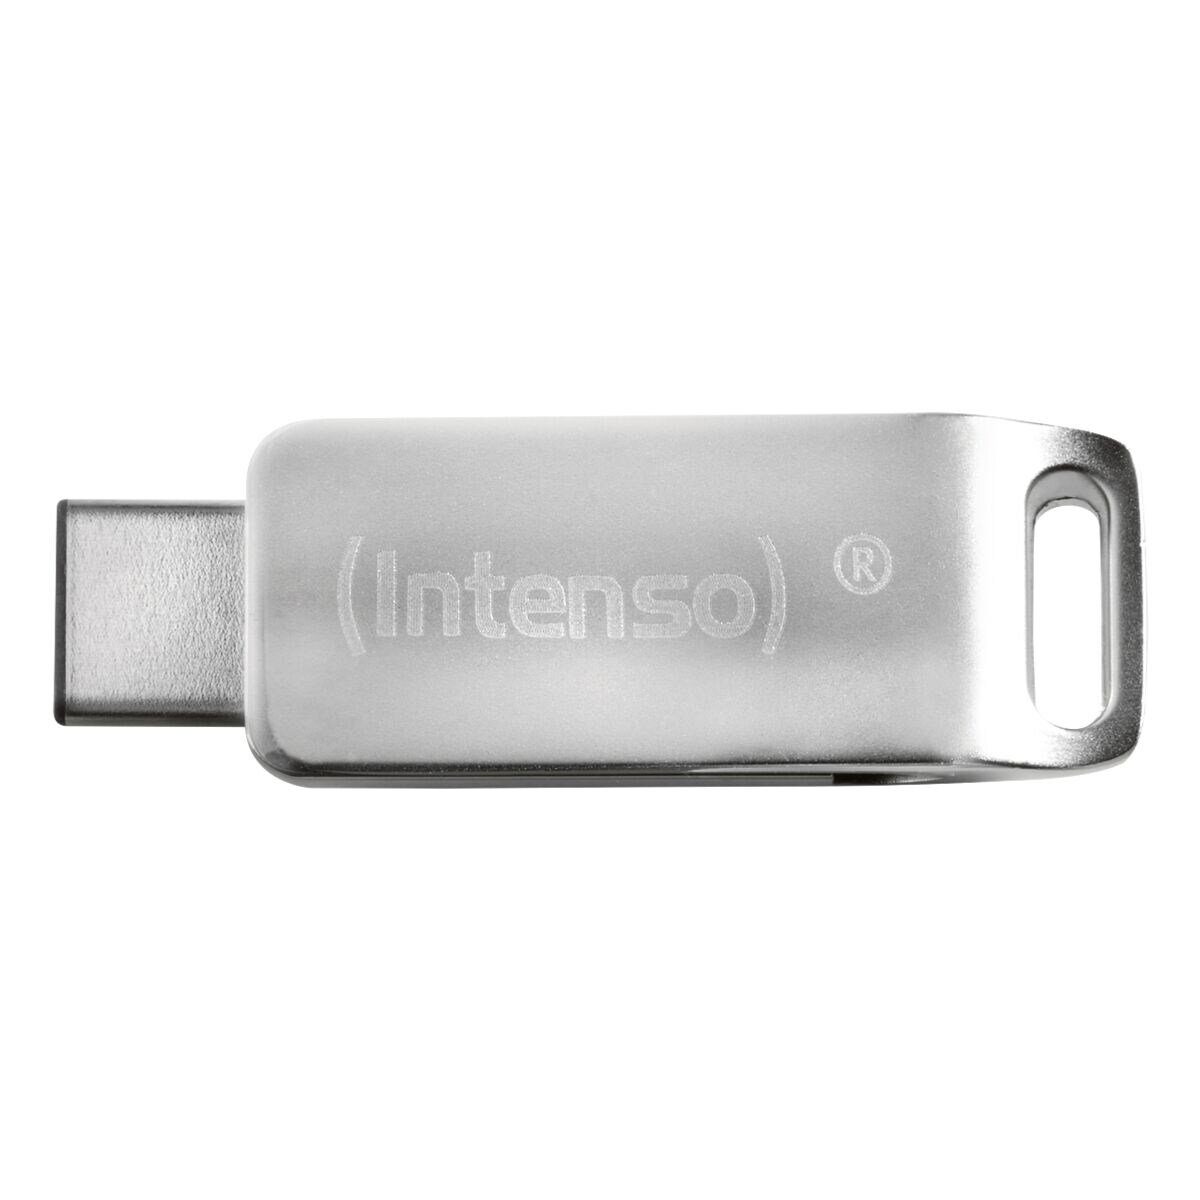 Intenso cMobile Line USB-Stick (Lesegeschwindigkeit 70 MB/s)